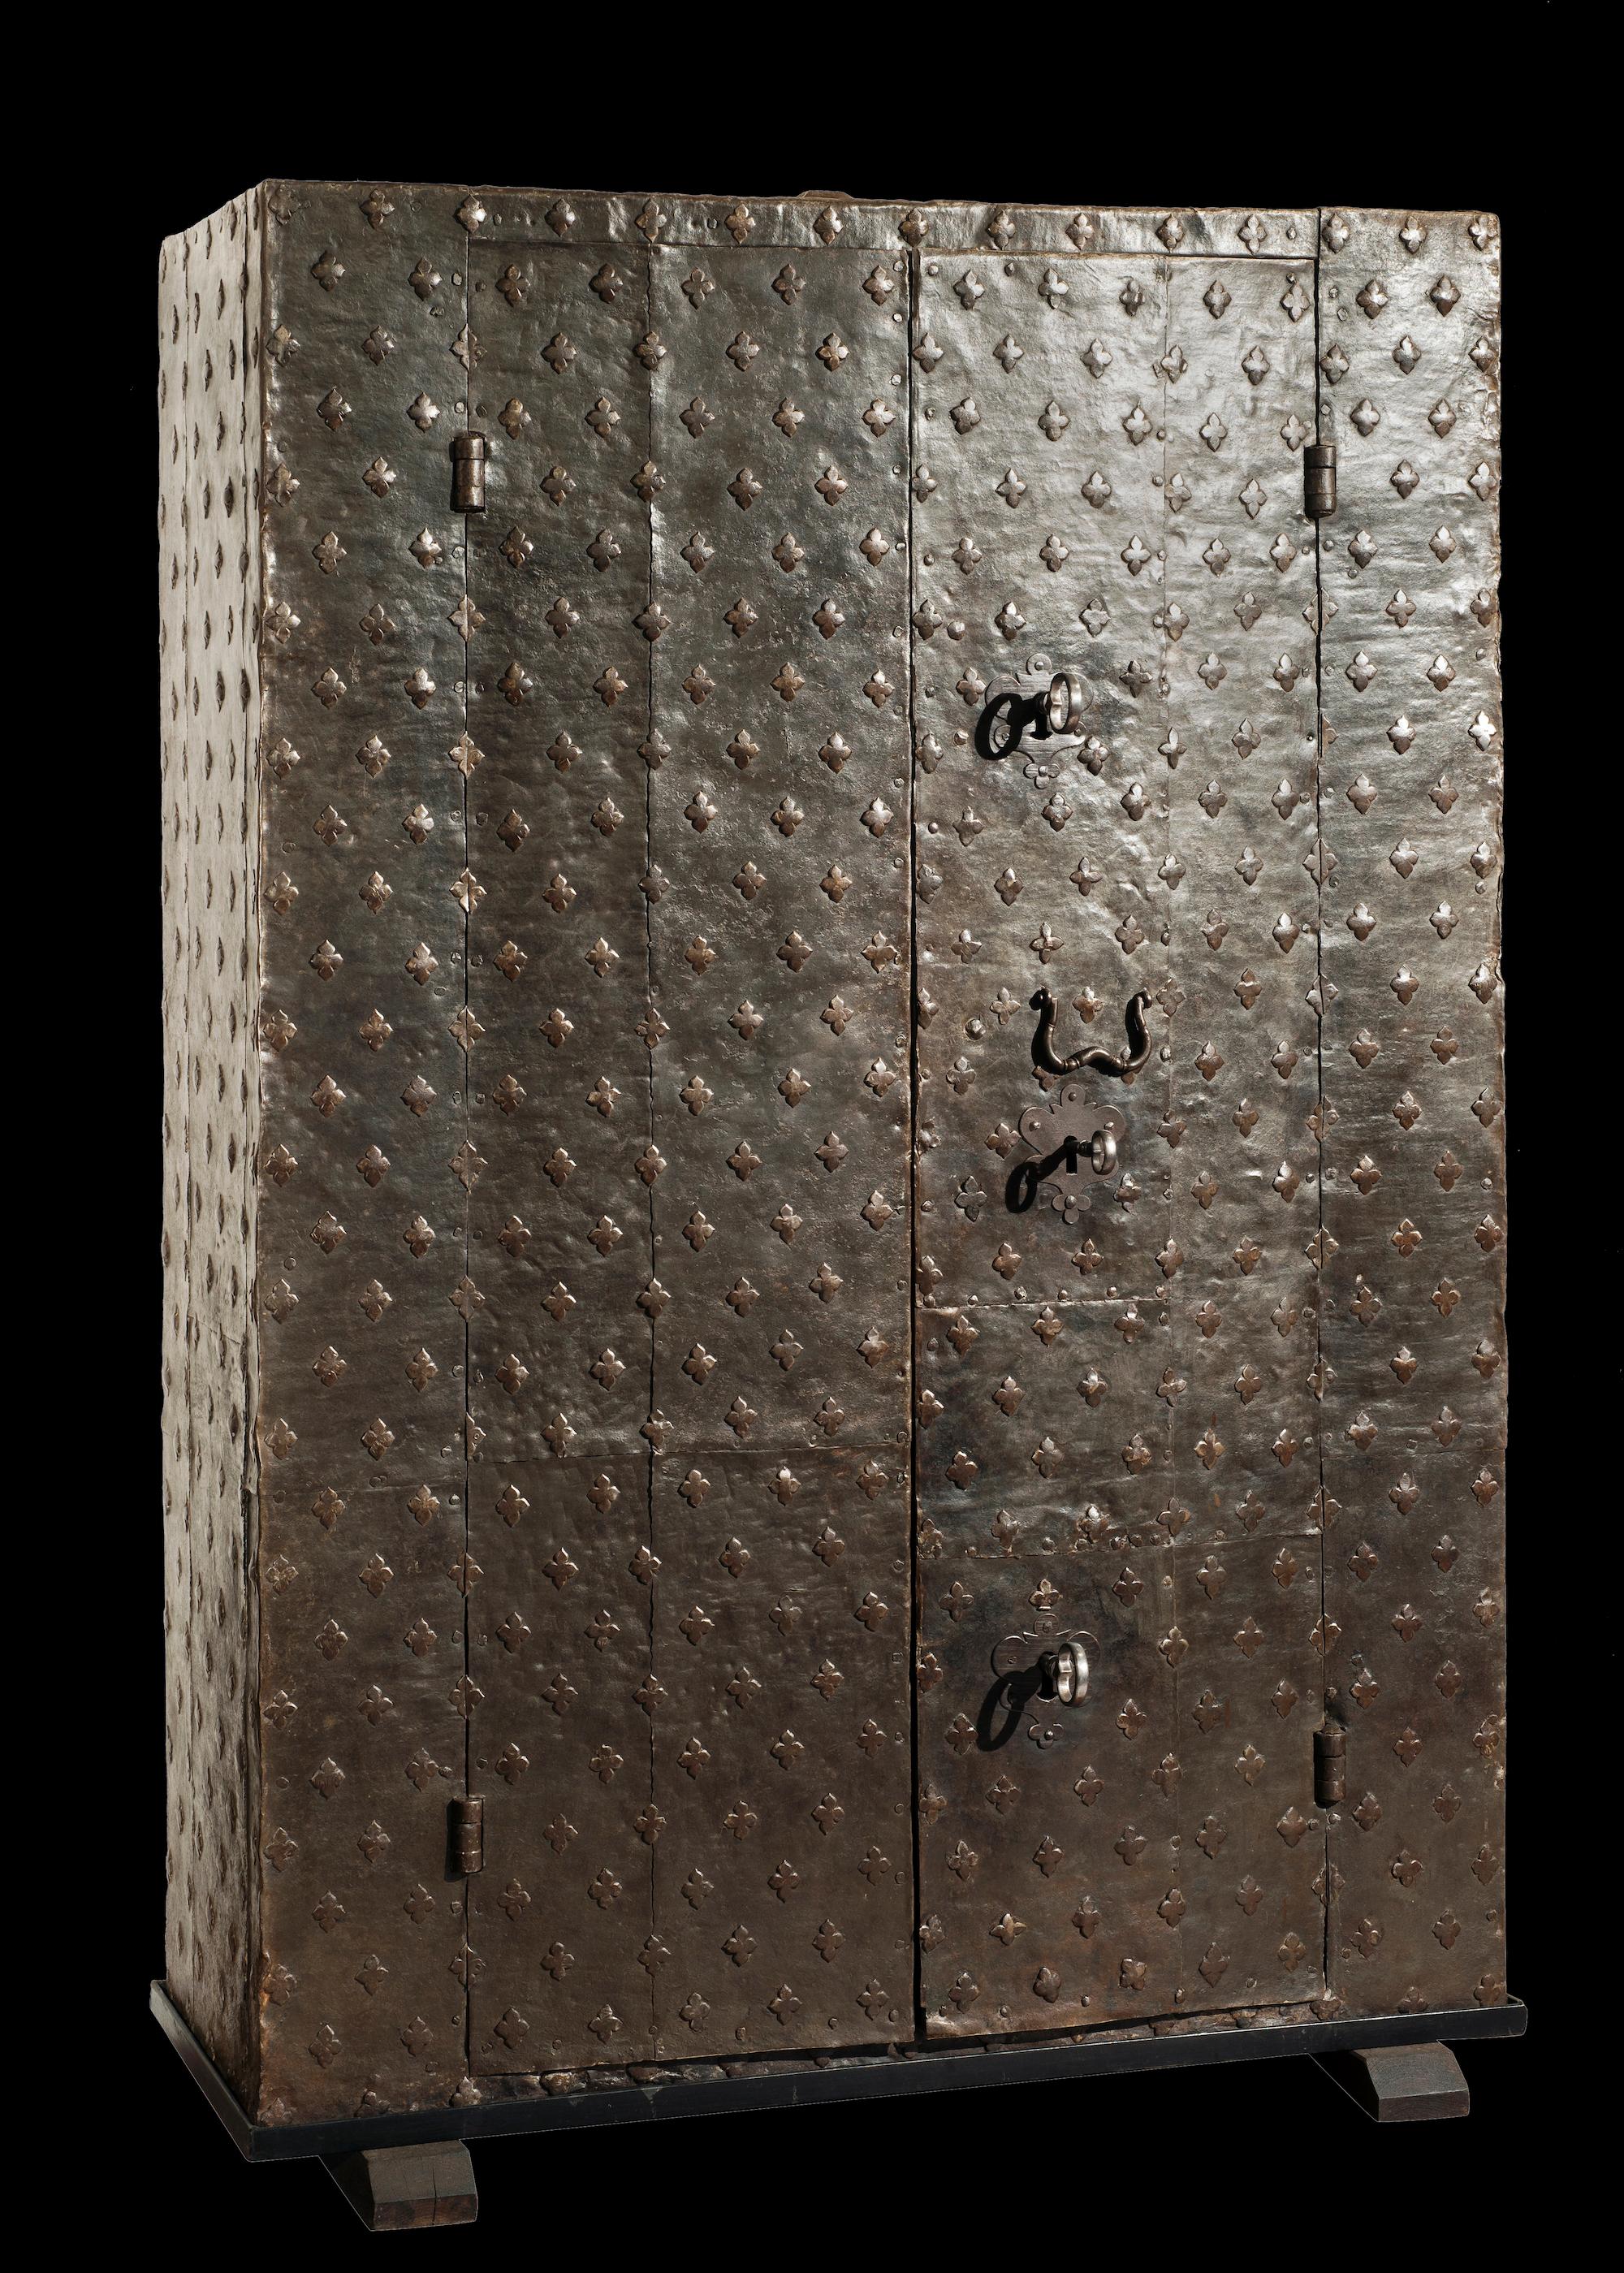 Double door safe

Northern Italy, 17th century

Measures 190x130x46.5 cm

Walnut structure made with very thick boards (6.5/8 cm) covered with iron sheets blocked by a dense and architecturally ordered series of quadrilobate head nails that